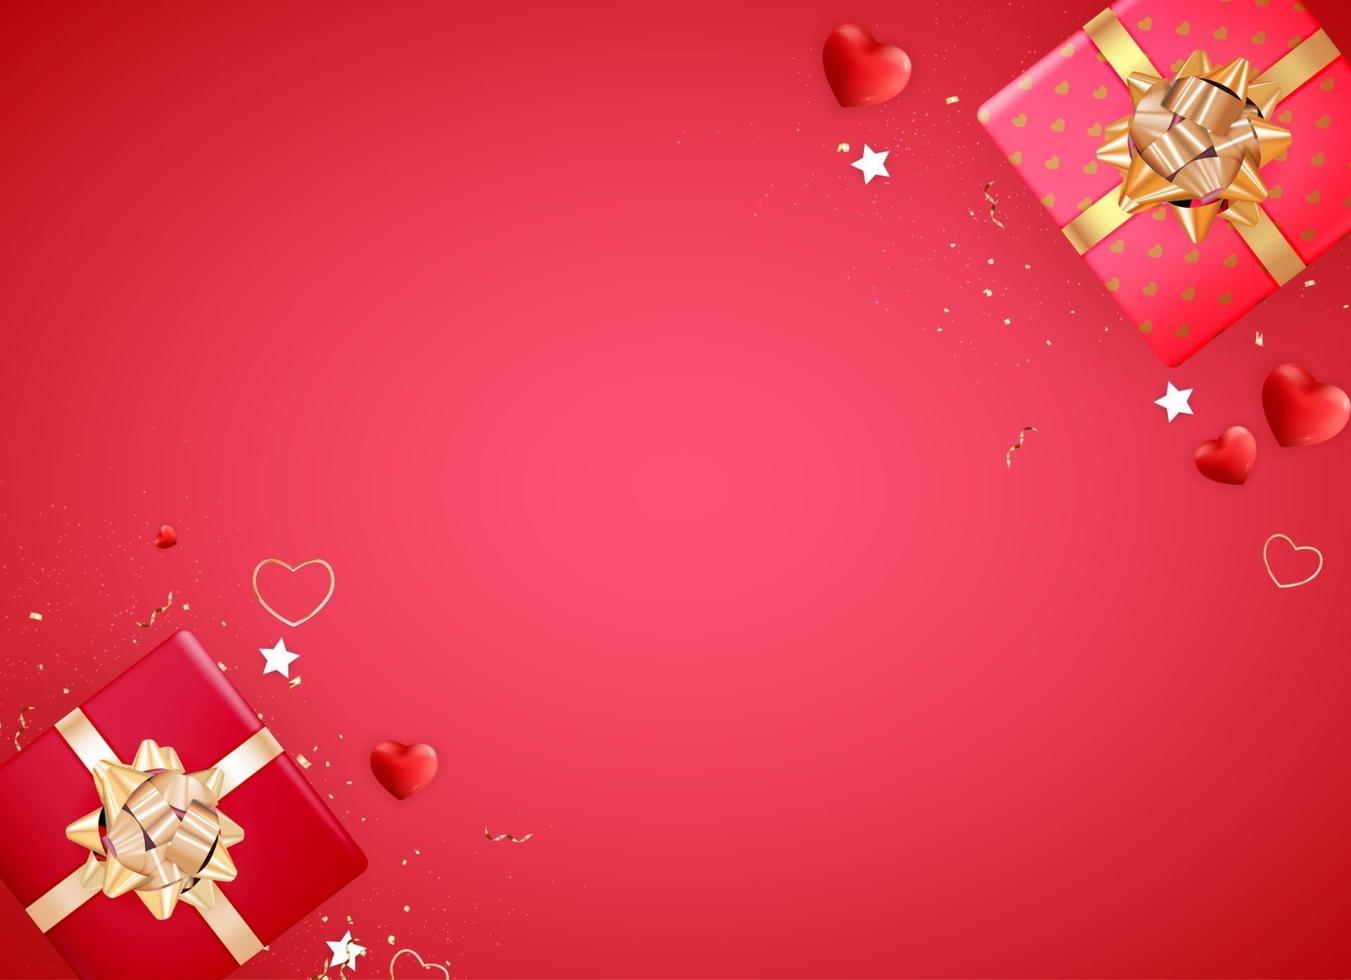 Valentine s Day Background Design with Realistic Lips and Hearts for Template for advertising or web or social media and fashion ads vector